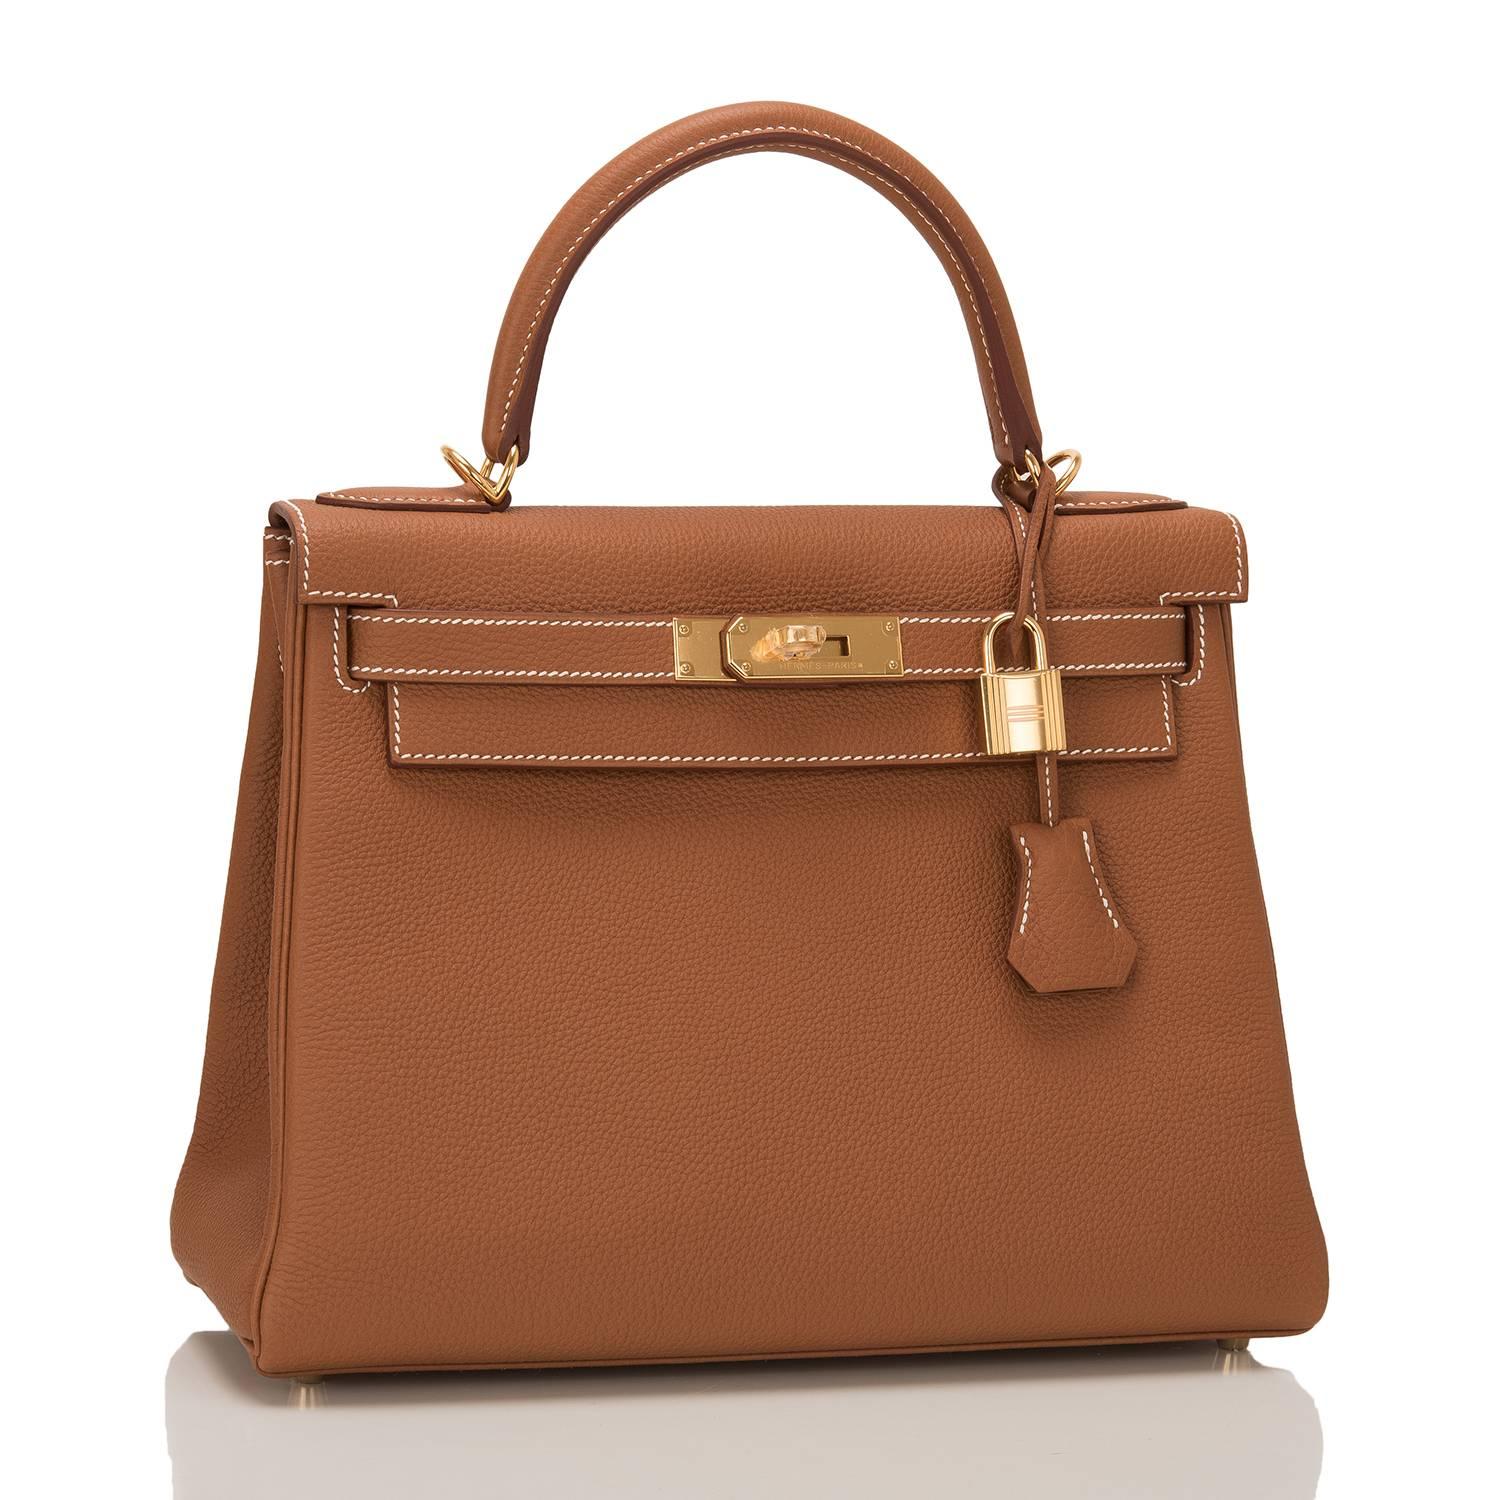 This Hermes Gold Kelly 28cm in togo leather with gold hardware.

It features white contrast stitching, front toggle closure, clochette with lock and two keys, single rolled handle and optional shoulder strap.

The interior is lined in gold